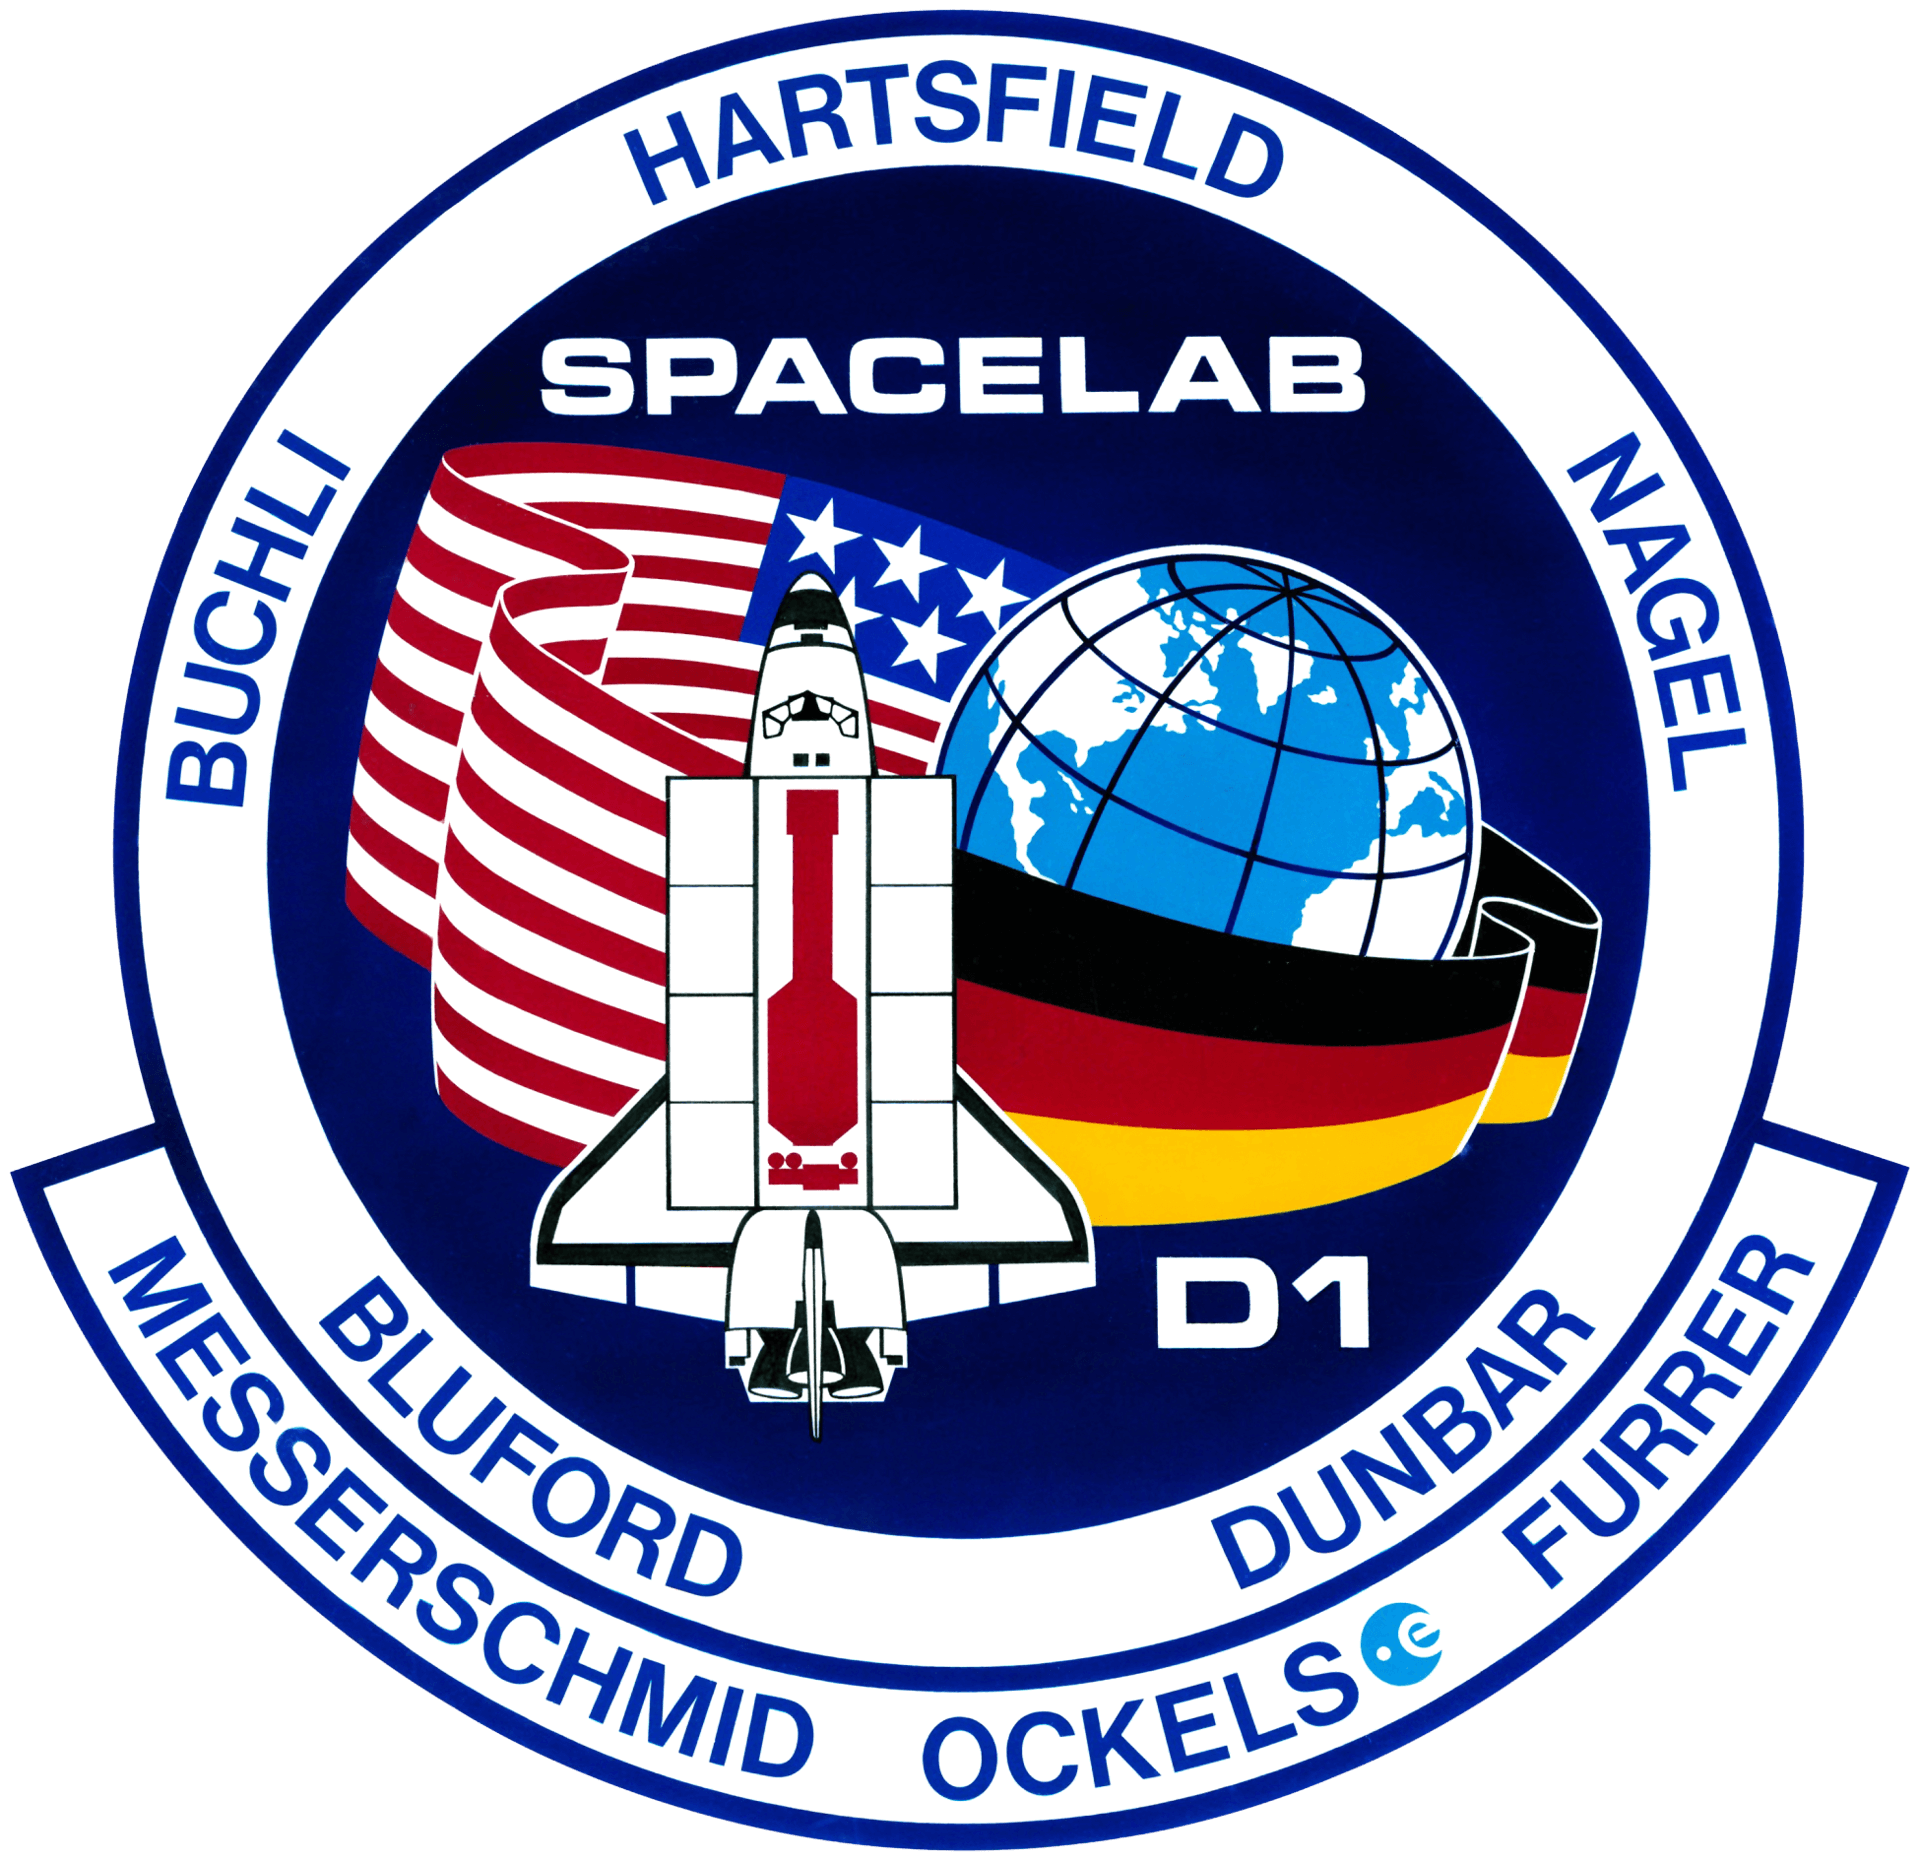 Mission patch for STS-61-A